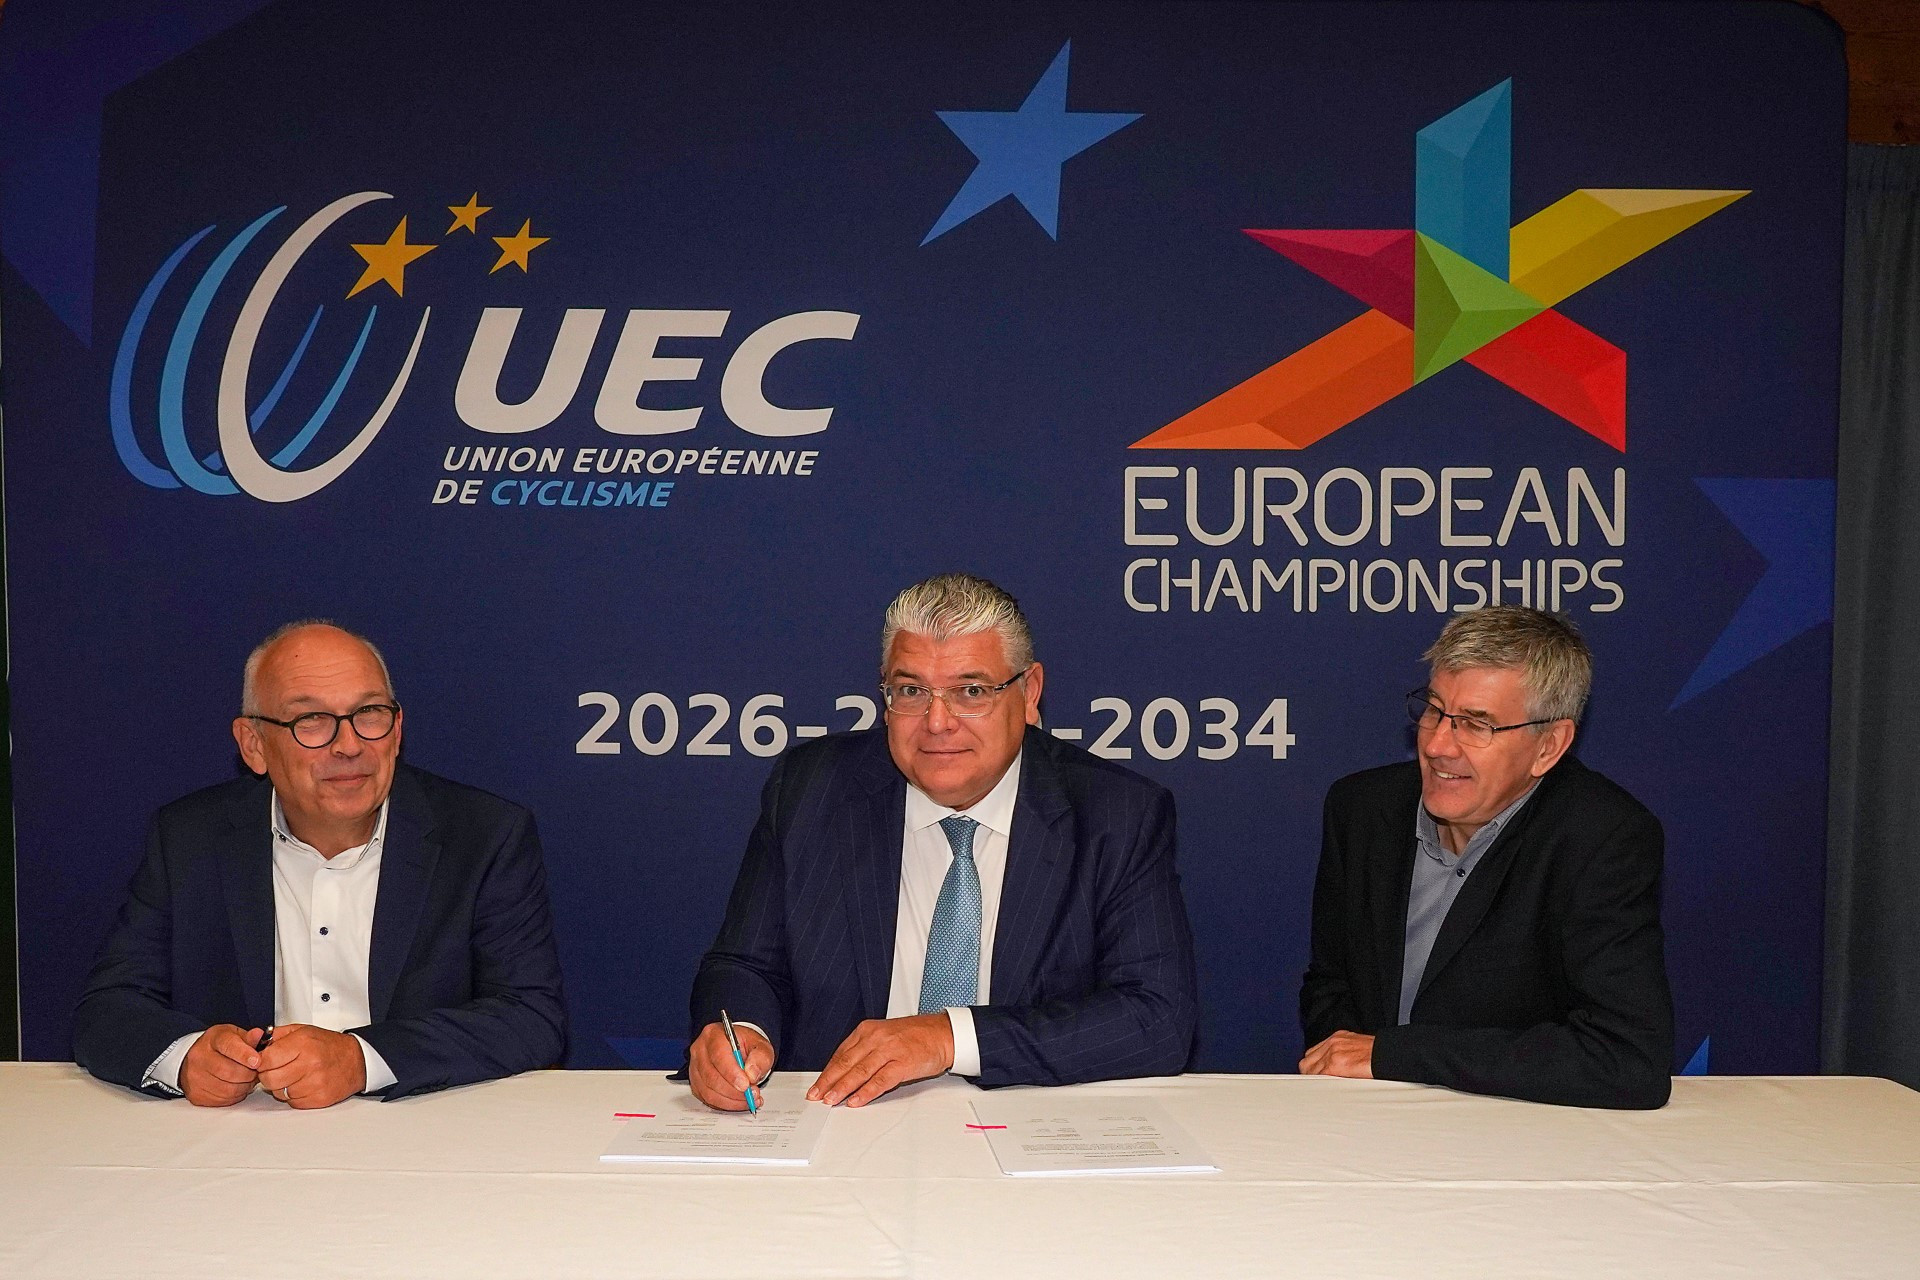  Cycling: The European Championship will continue to be a multisport event every four years until 2034